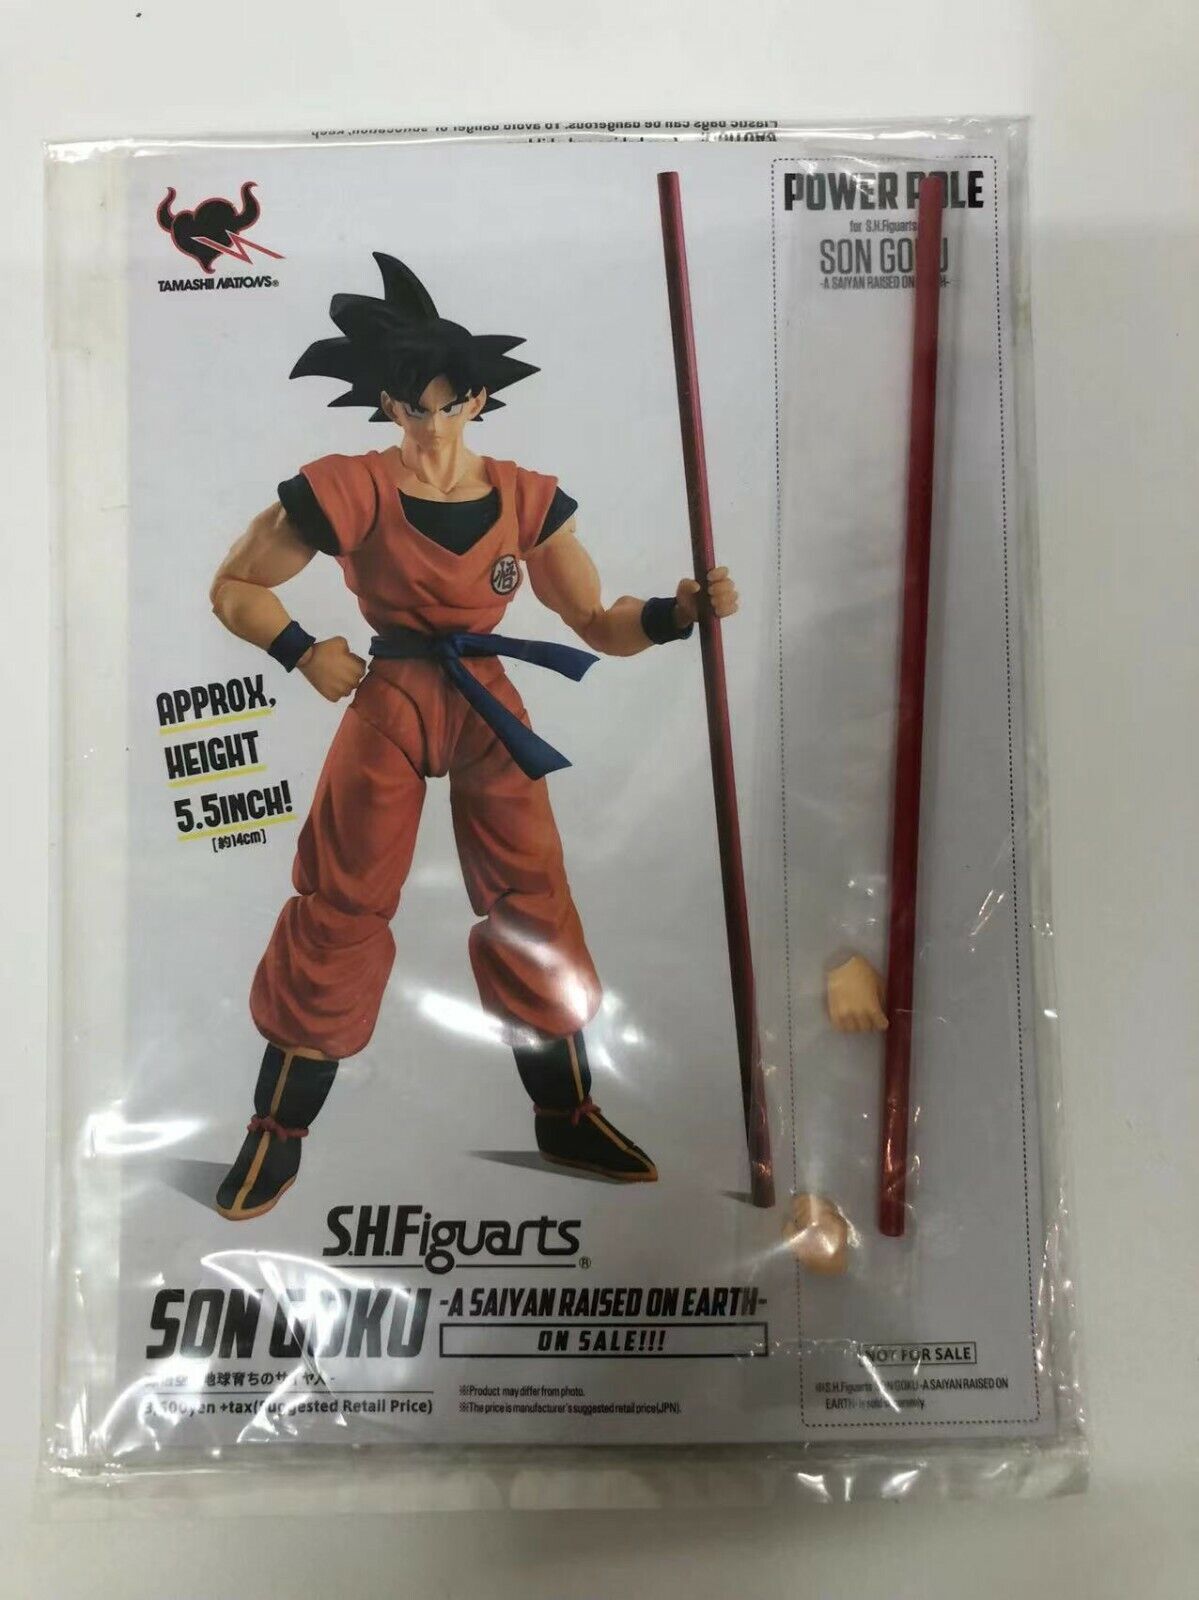 SDCC 2018 Tamashii Nations POWER POLE EXCLUSIVE for S.H.Figuarts Son Goku